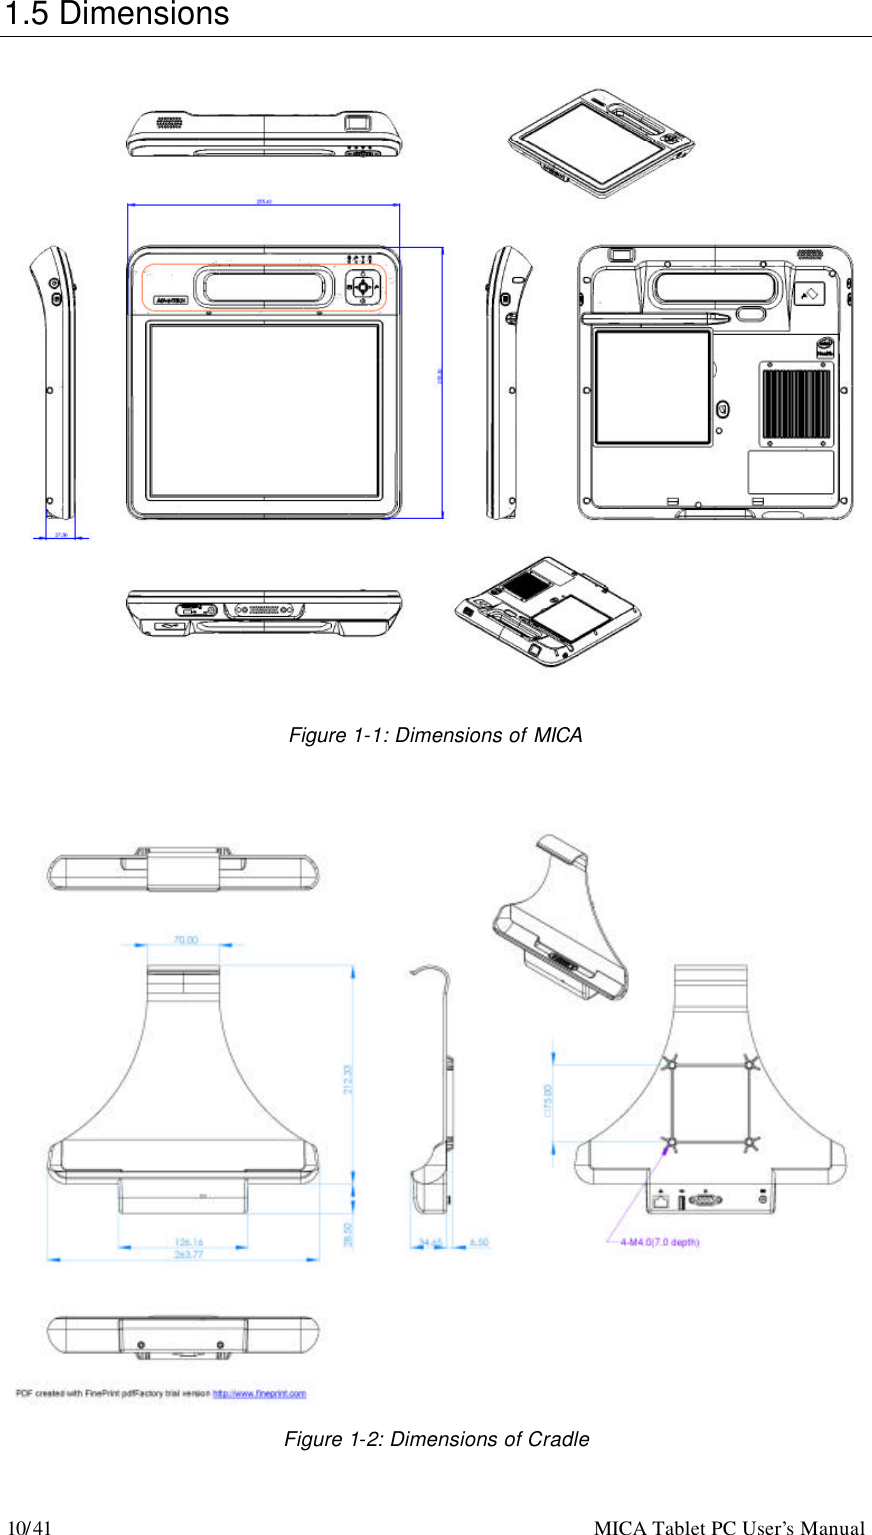 10/41                                                    MICA Tablet PC User’s Manual 1.5 Dimensions        Figure 1-1: Dimensions of MICA     Figure 1-2: Dimensions of Cradle  